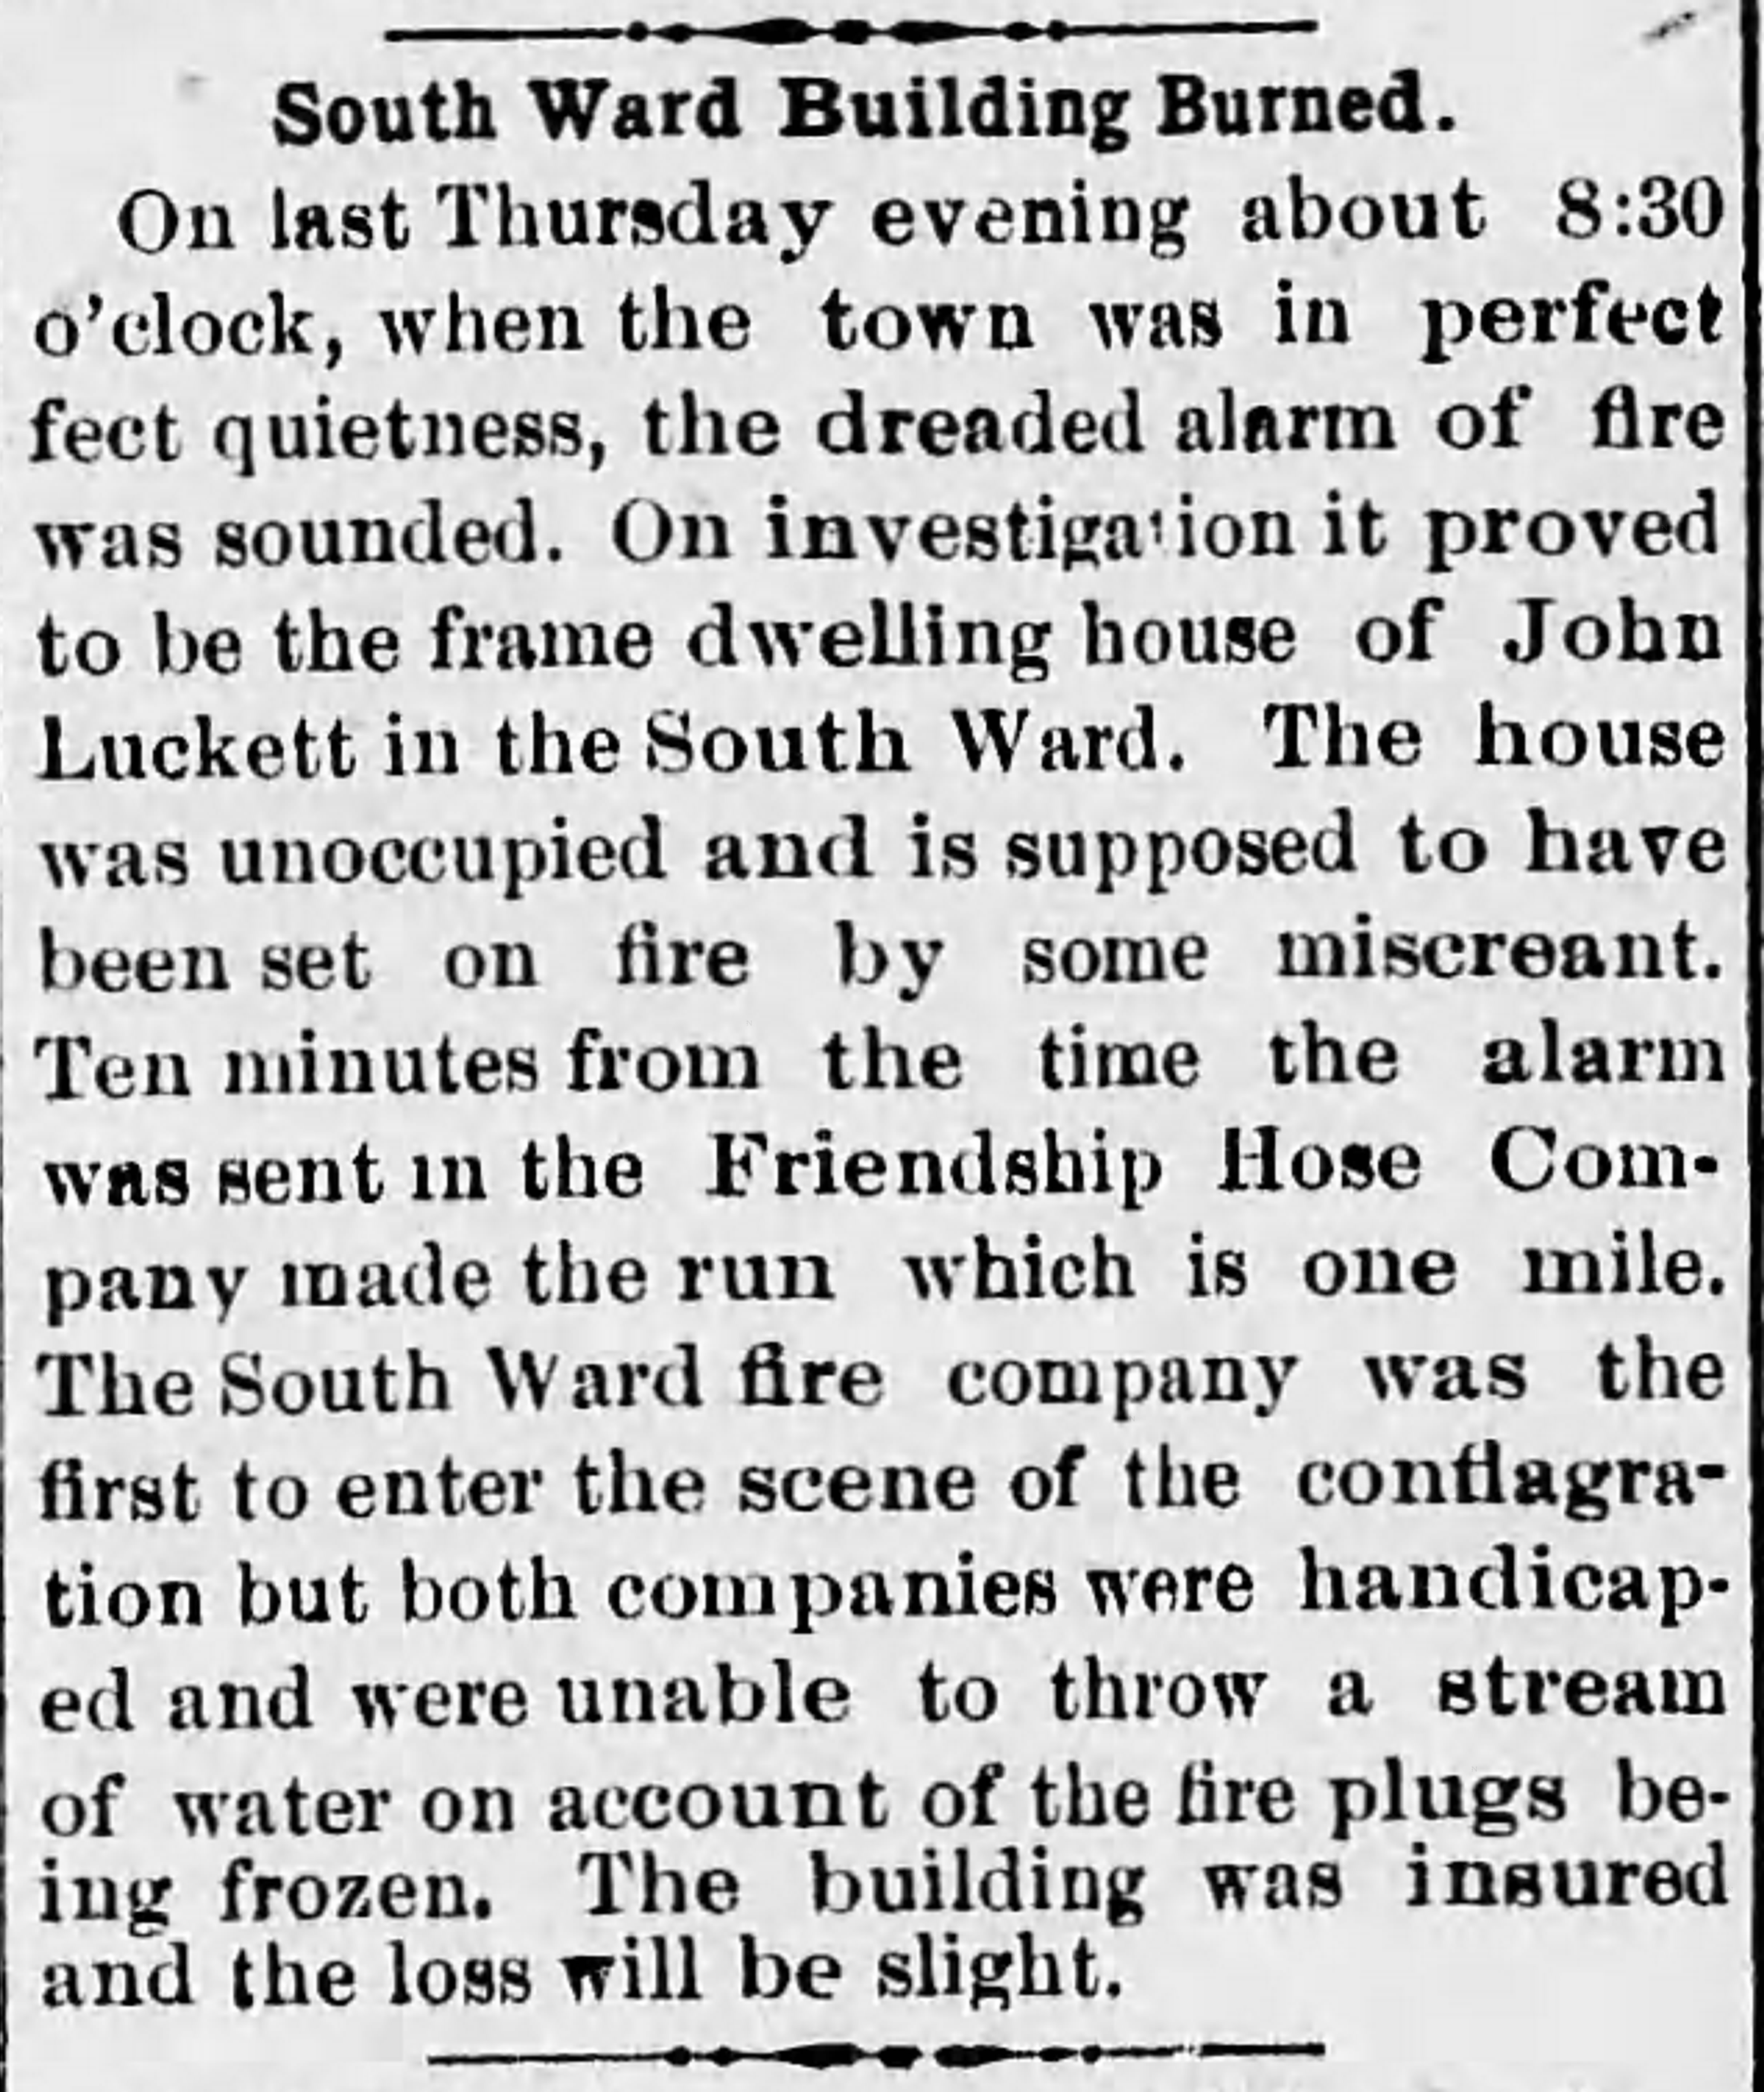 Newspaper article about a building that belonged to John Luckett burning down. 